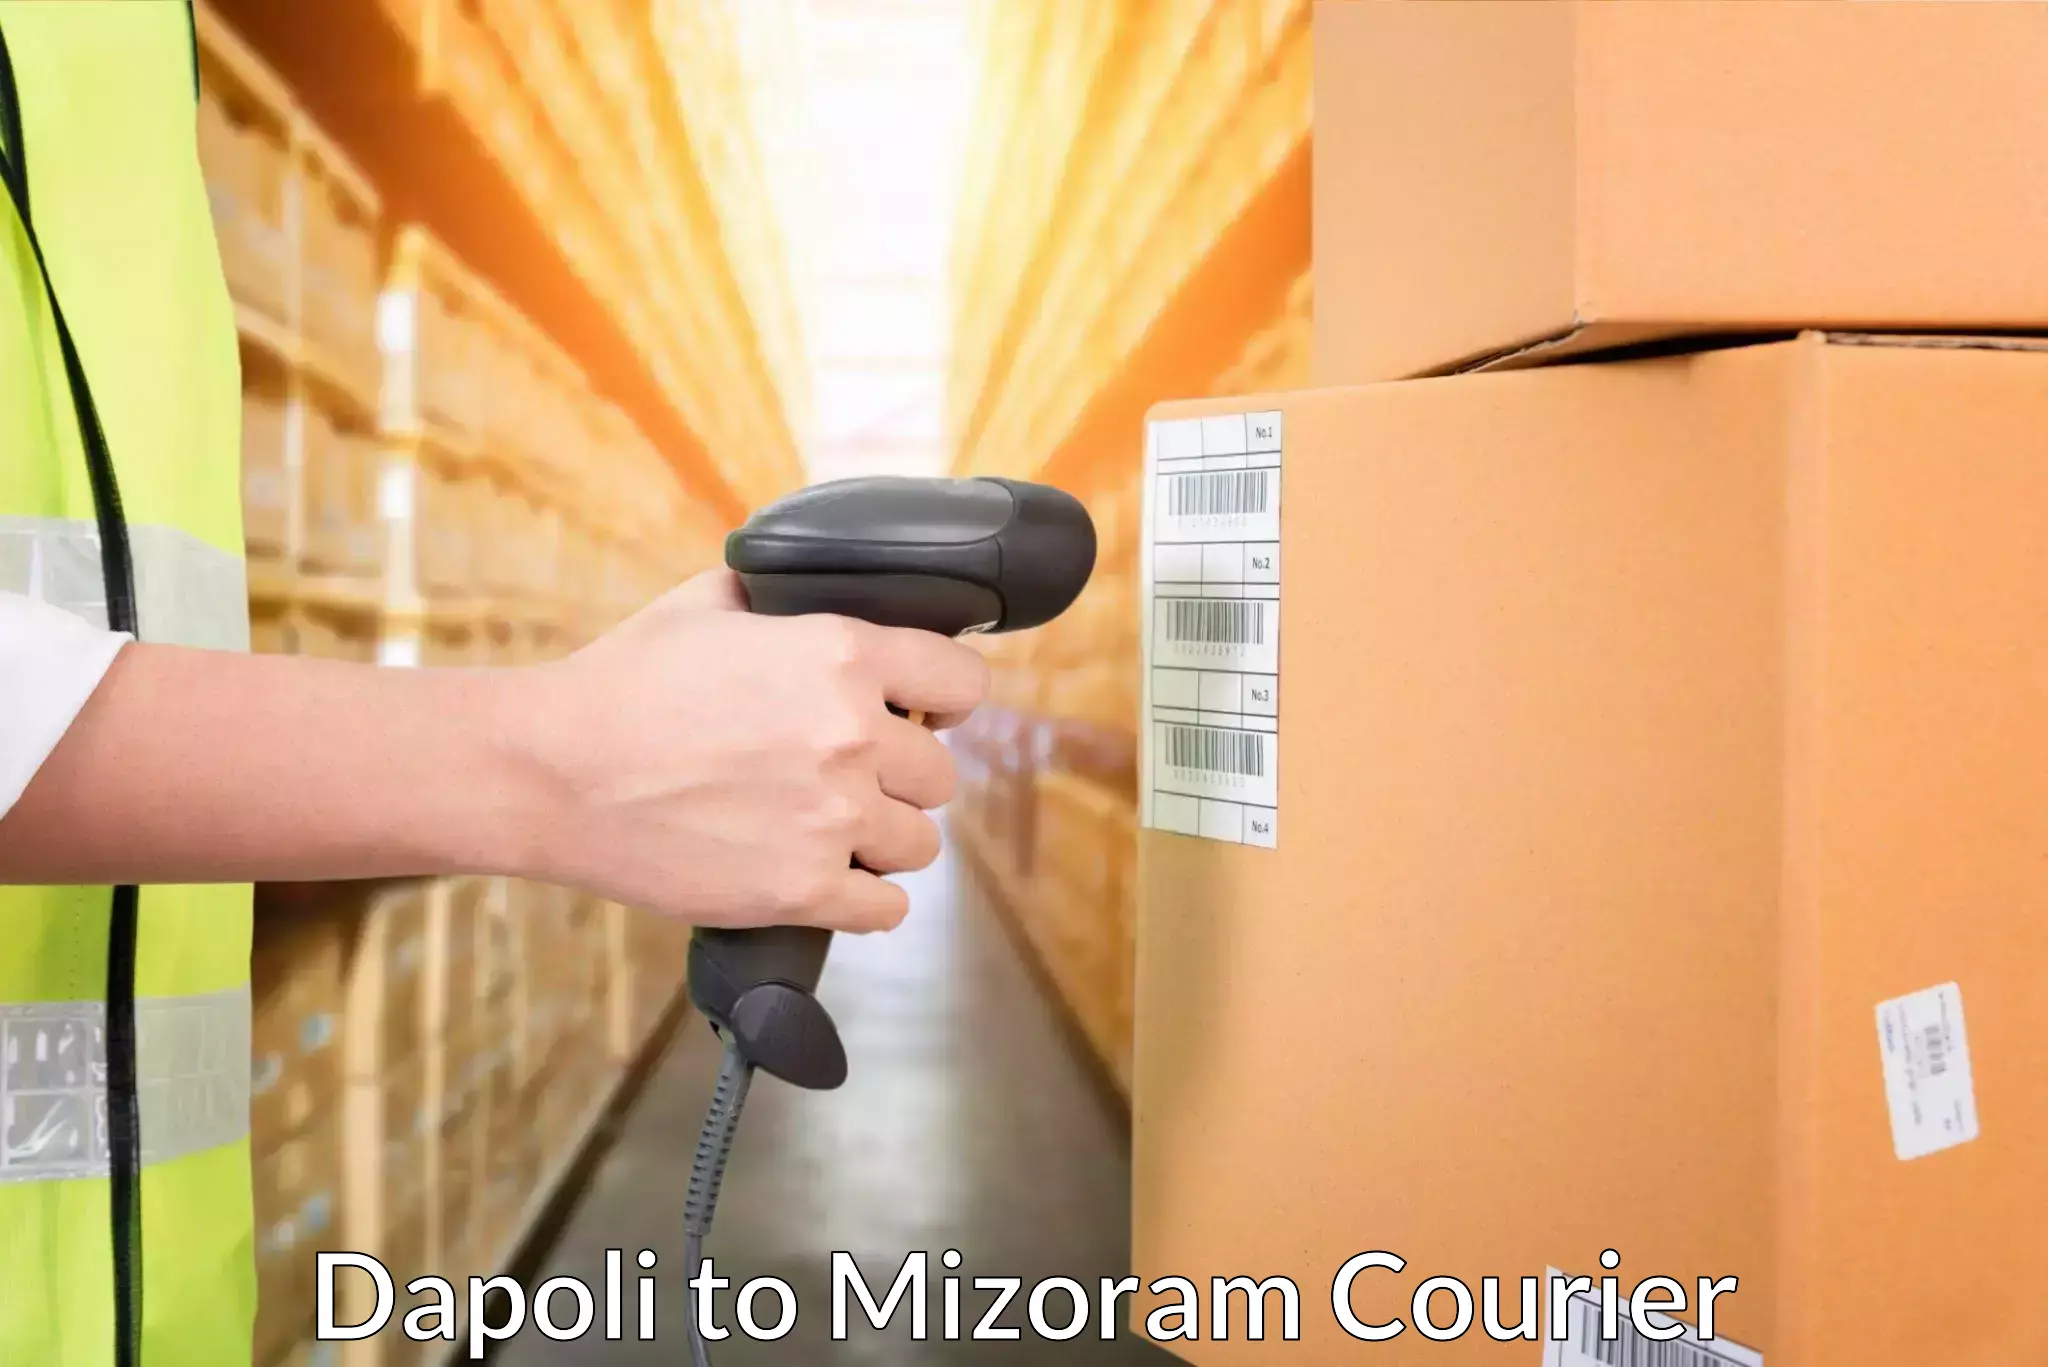 Modern courier technology Dapoli to Darlawn